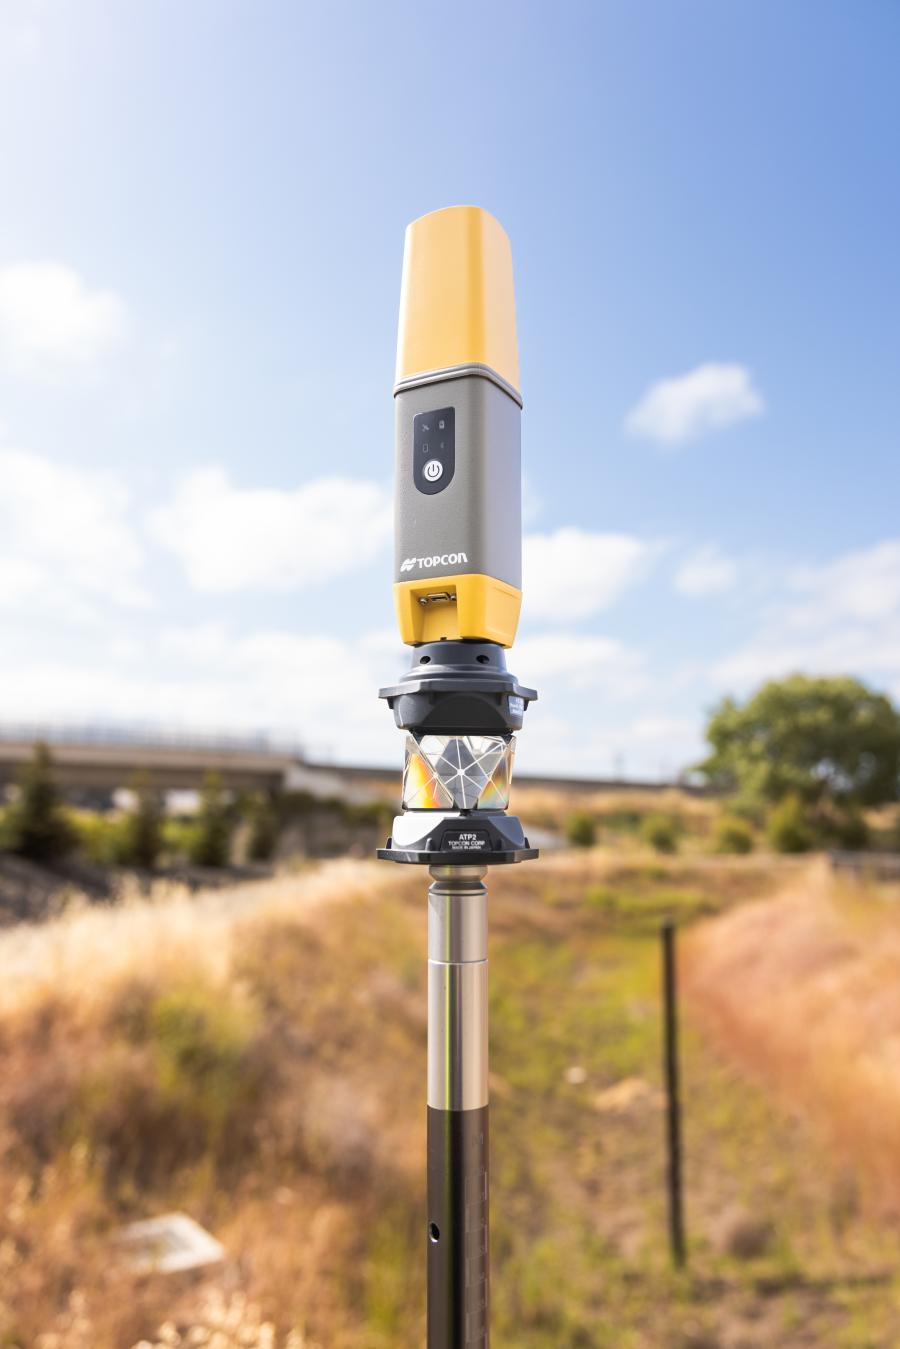 The HiPer CR is a compact and lightweight GNSS receiver designed for centimeter-level, real-time kinematic (RTK) accuracy for professionals engaged in a wide range of applications in the surveying, construction, engineering, forestry and mining industries.